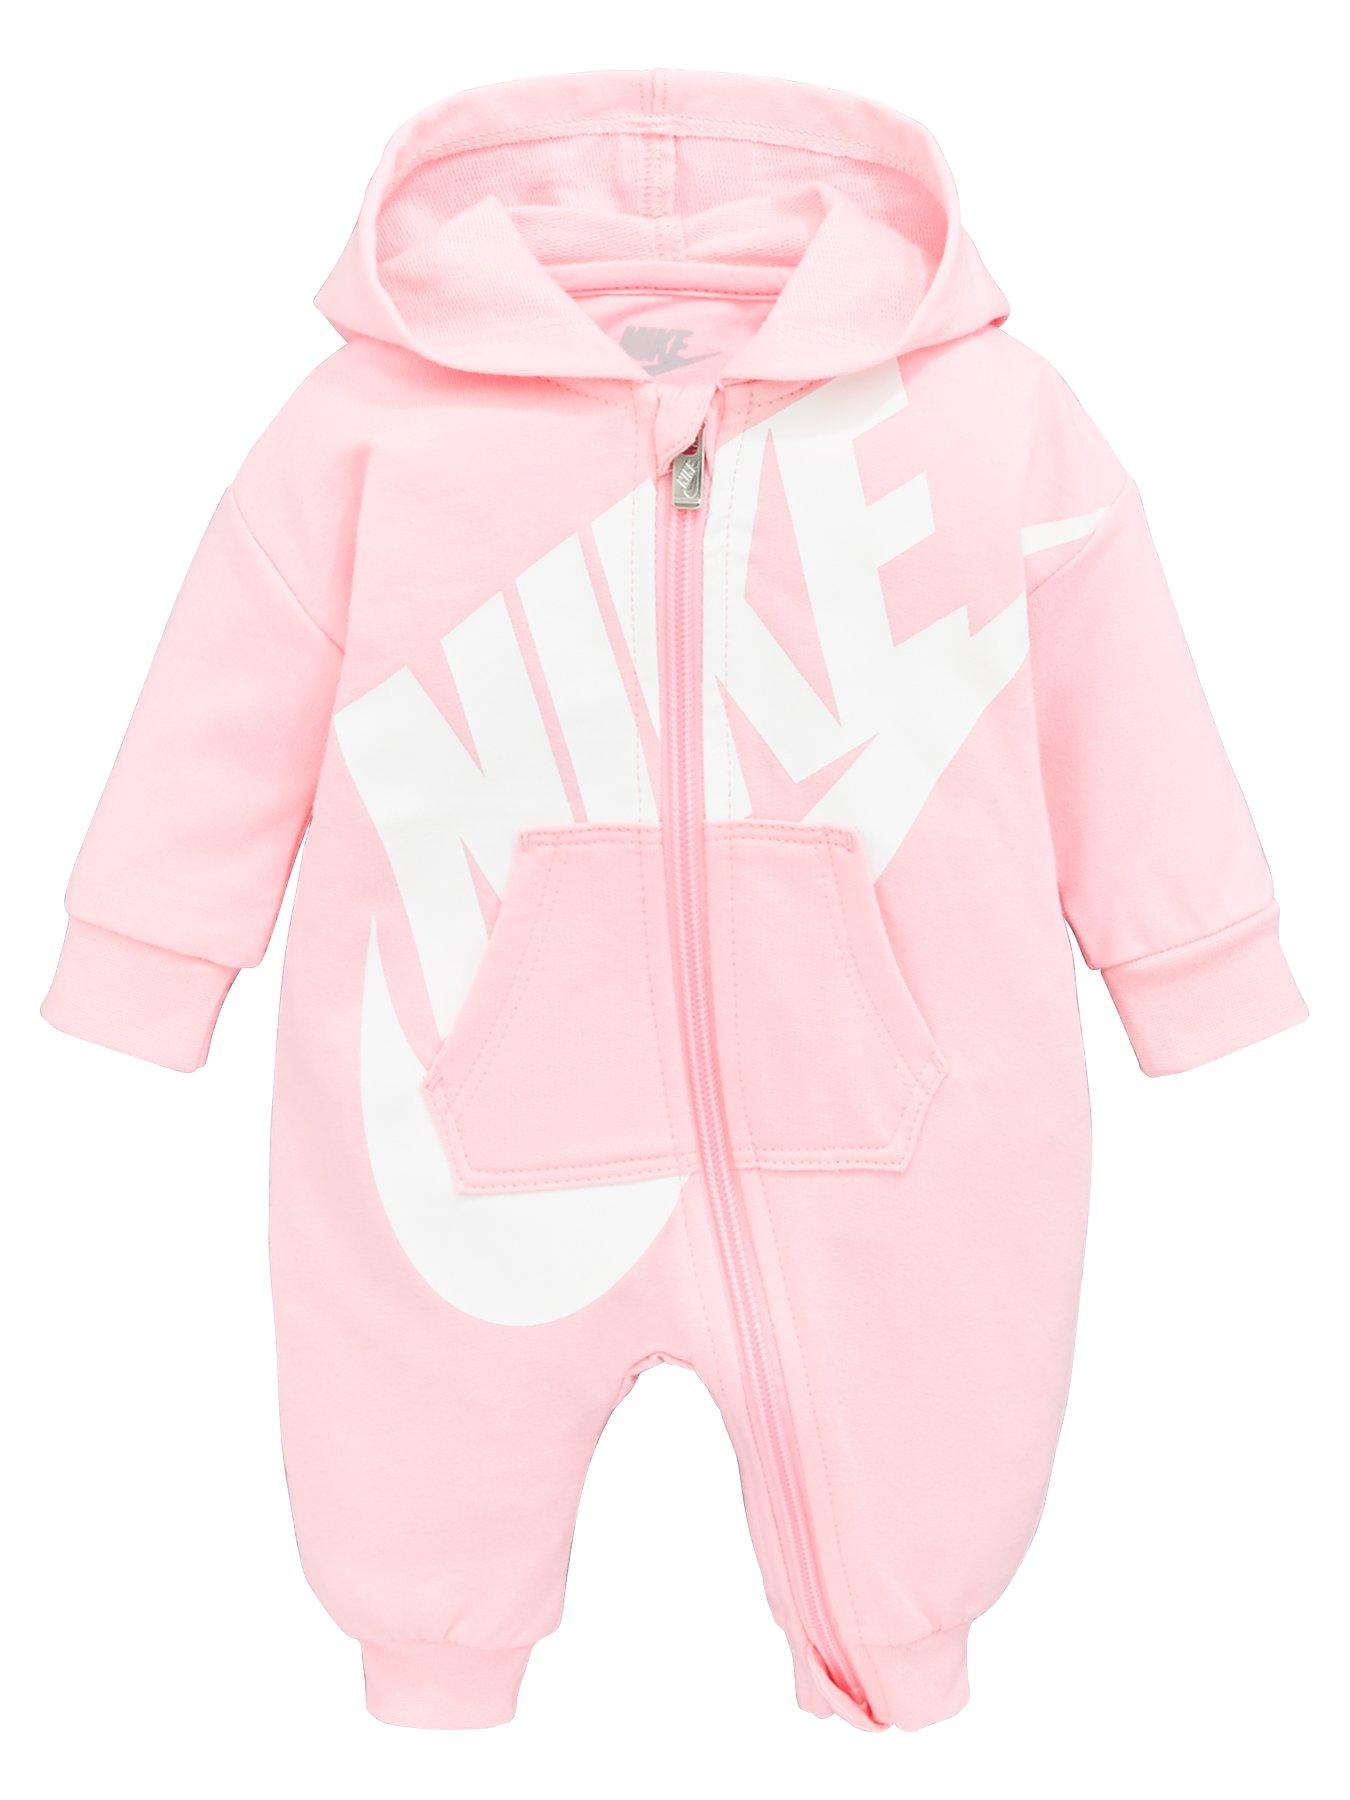 pink nike baby outfit